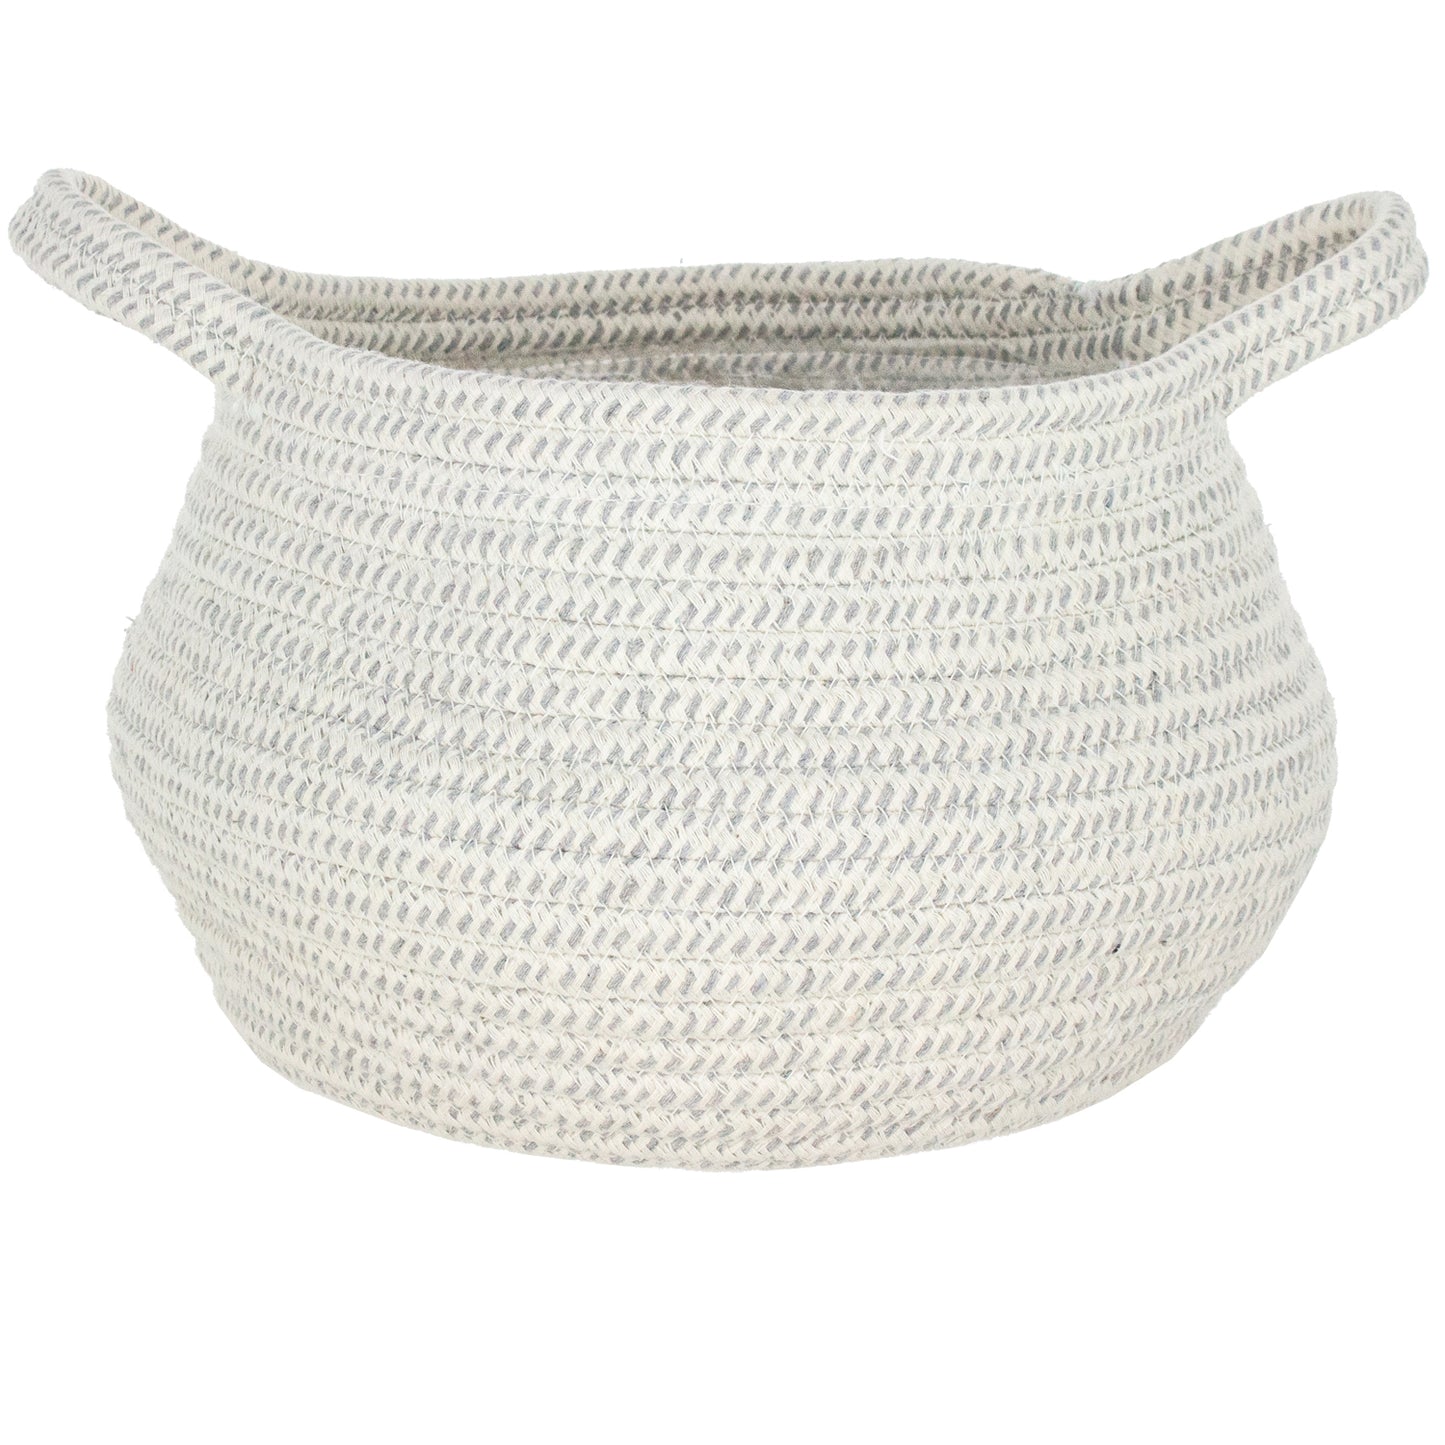 Cable Basket in Heathered Grey